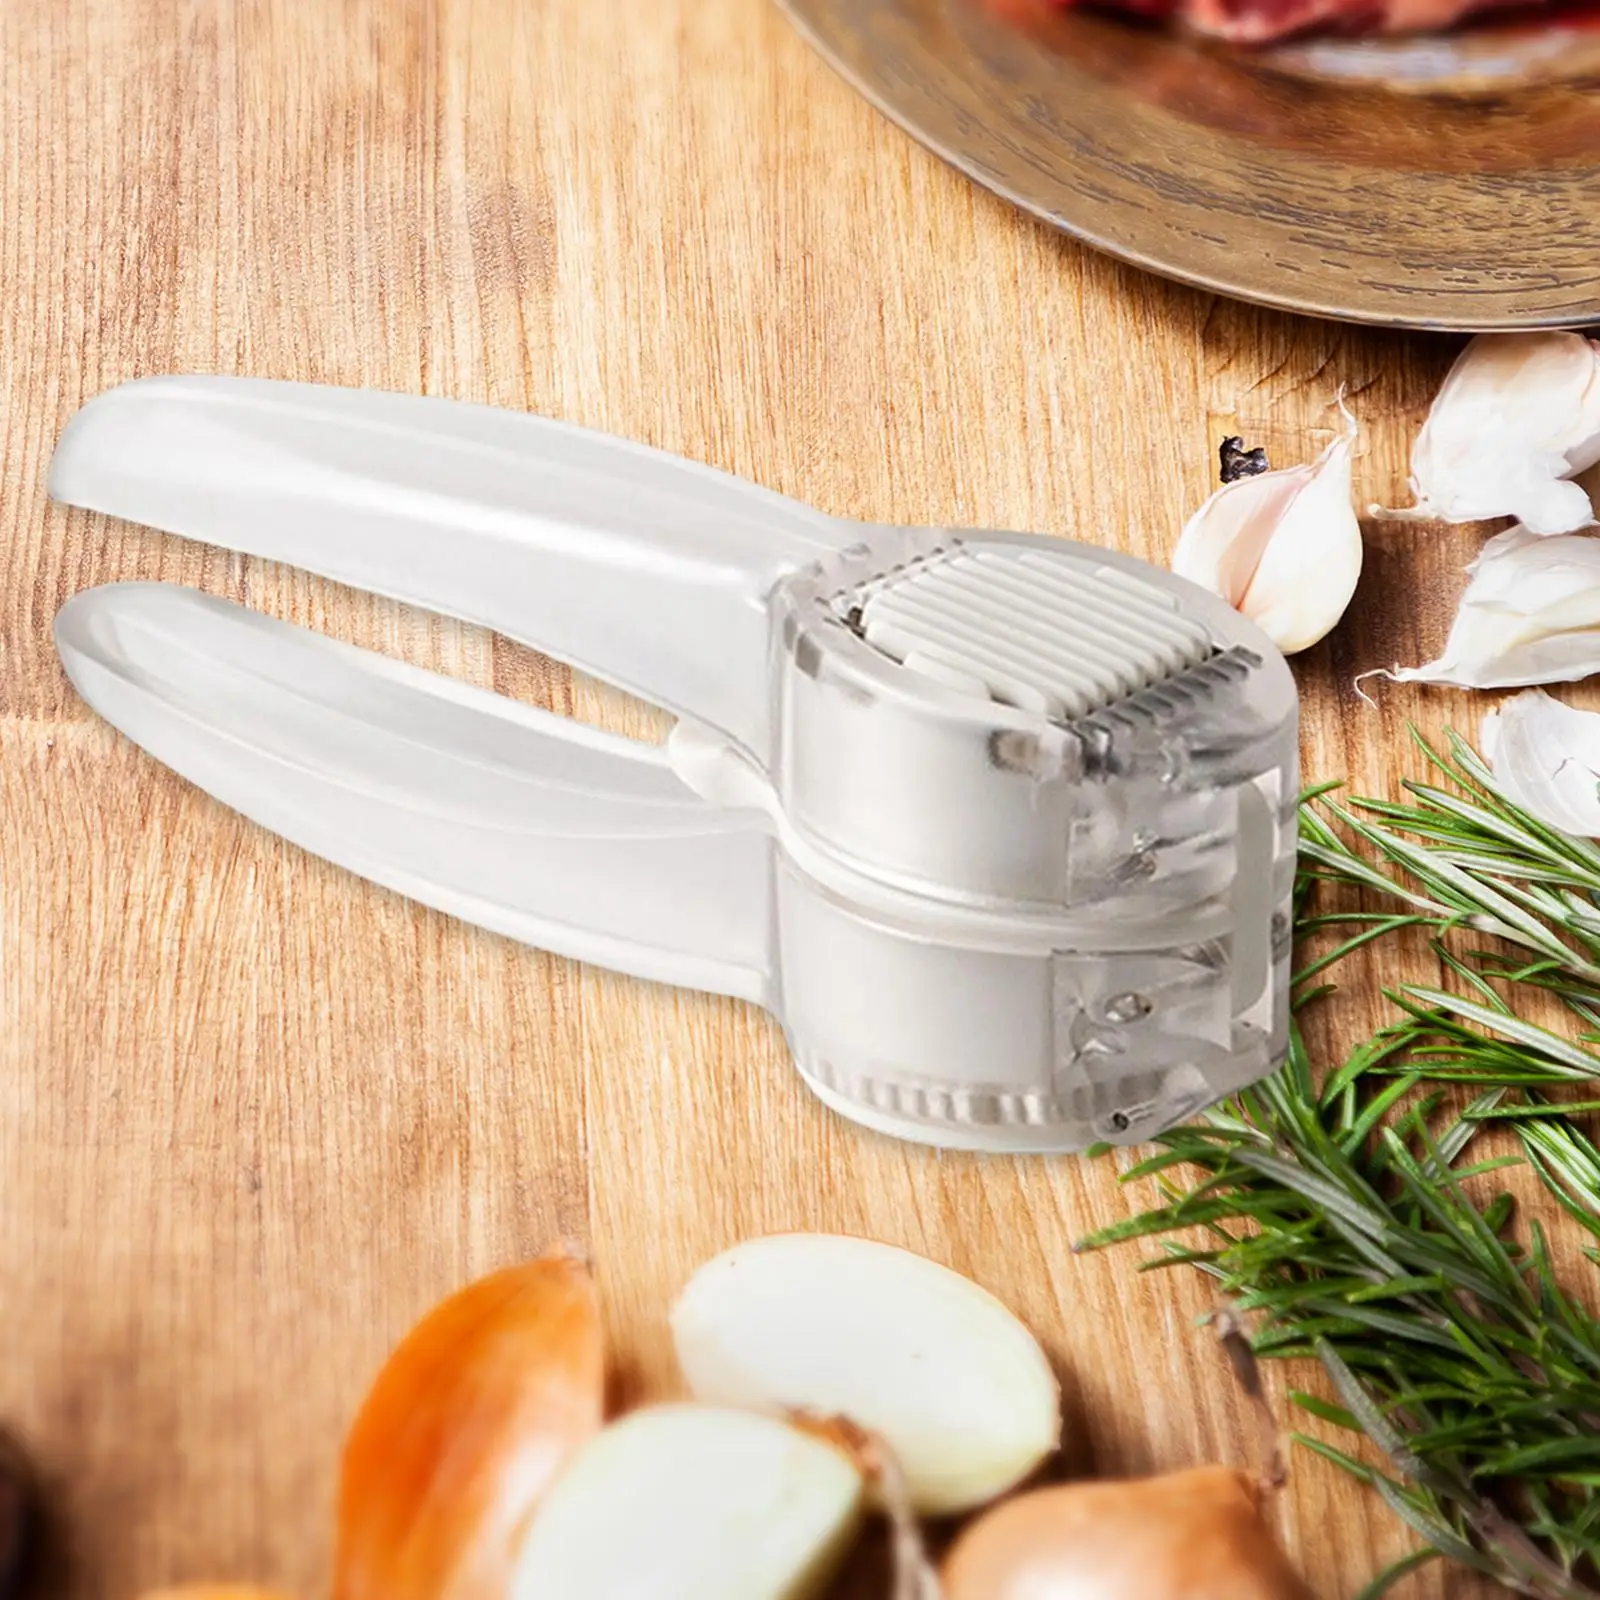 Manual Ginger Mincer Kitchen Tool Squeezer Masher with Ergonomic Handle Garlic Press for Nuts Ginger Vegetable Onion